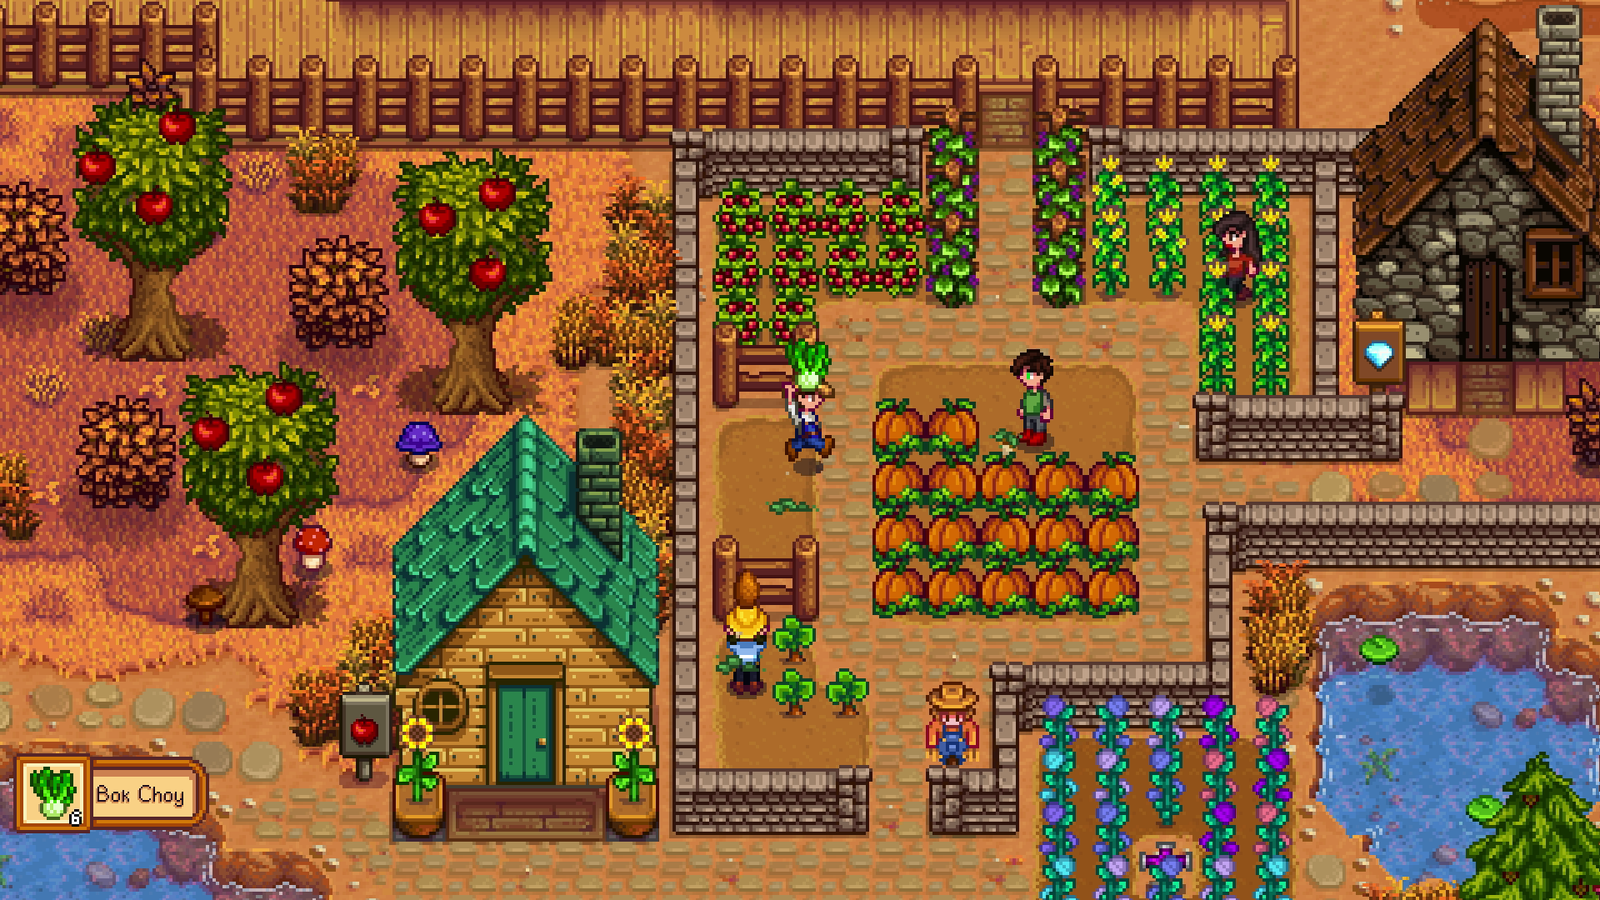 Stardew Valley' Multiplayer Now Available on PC